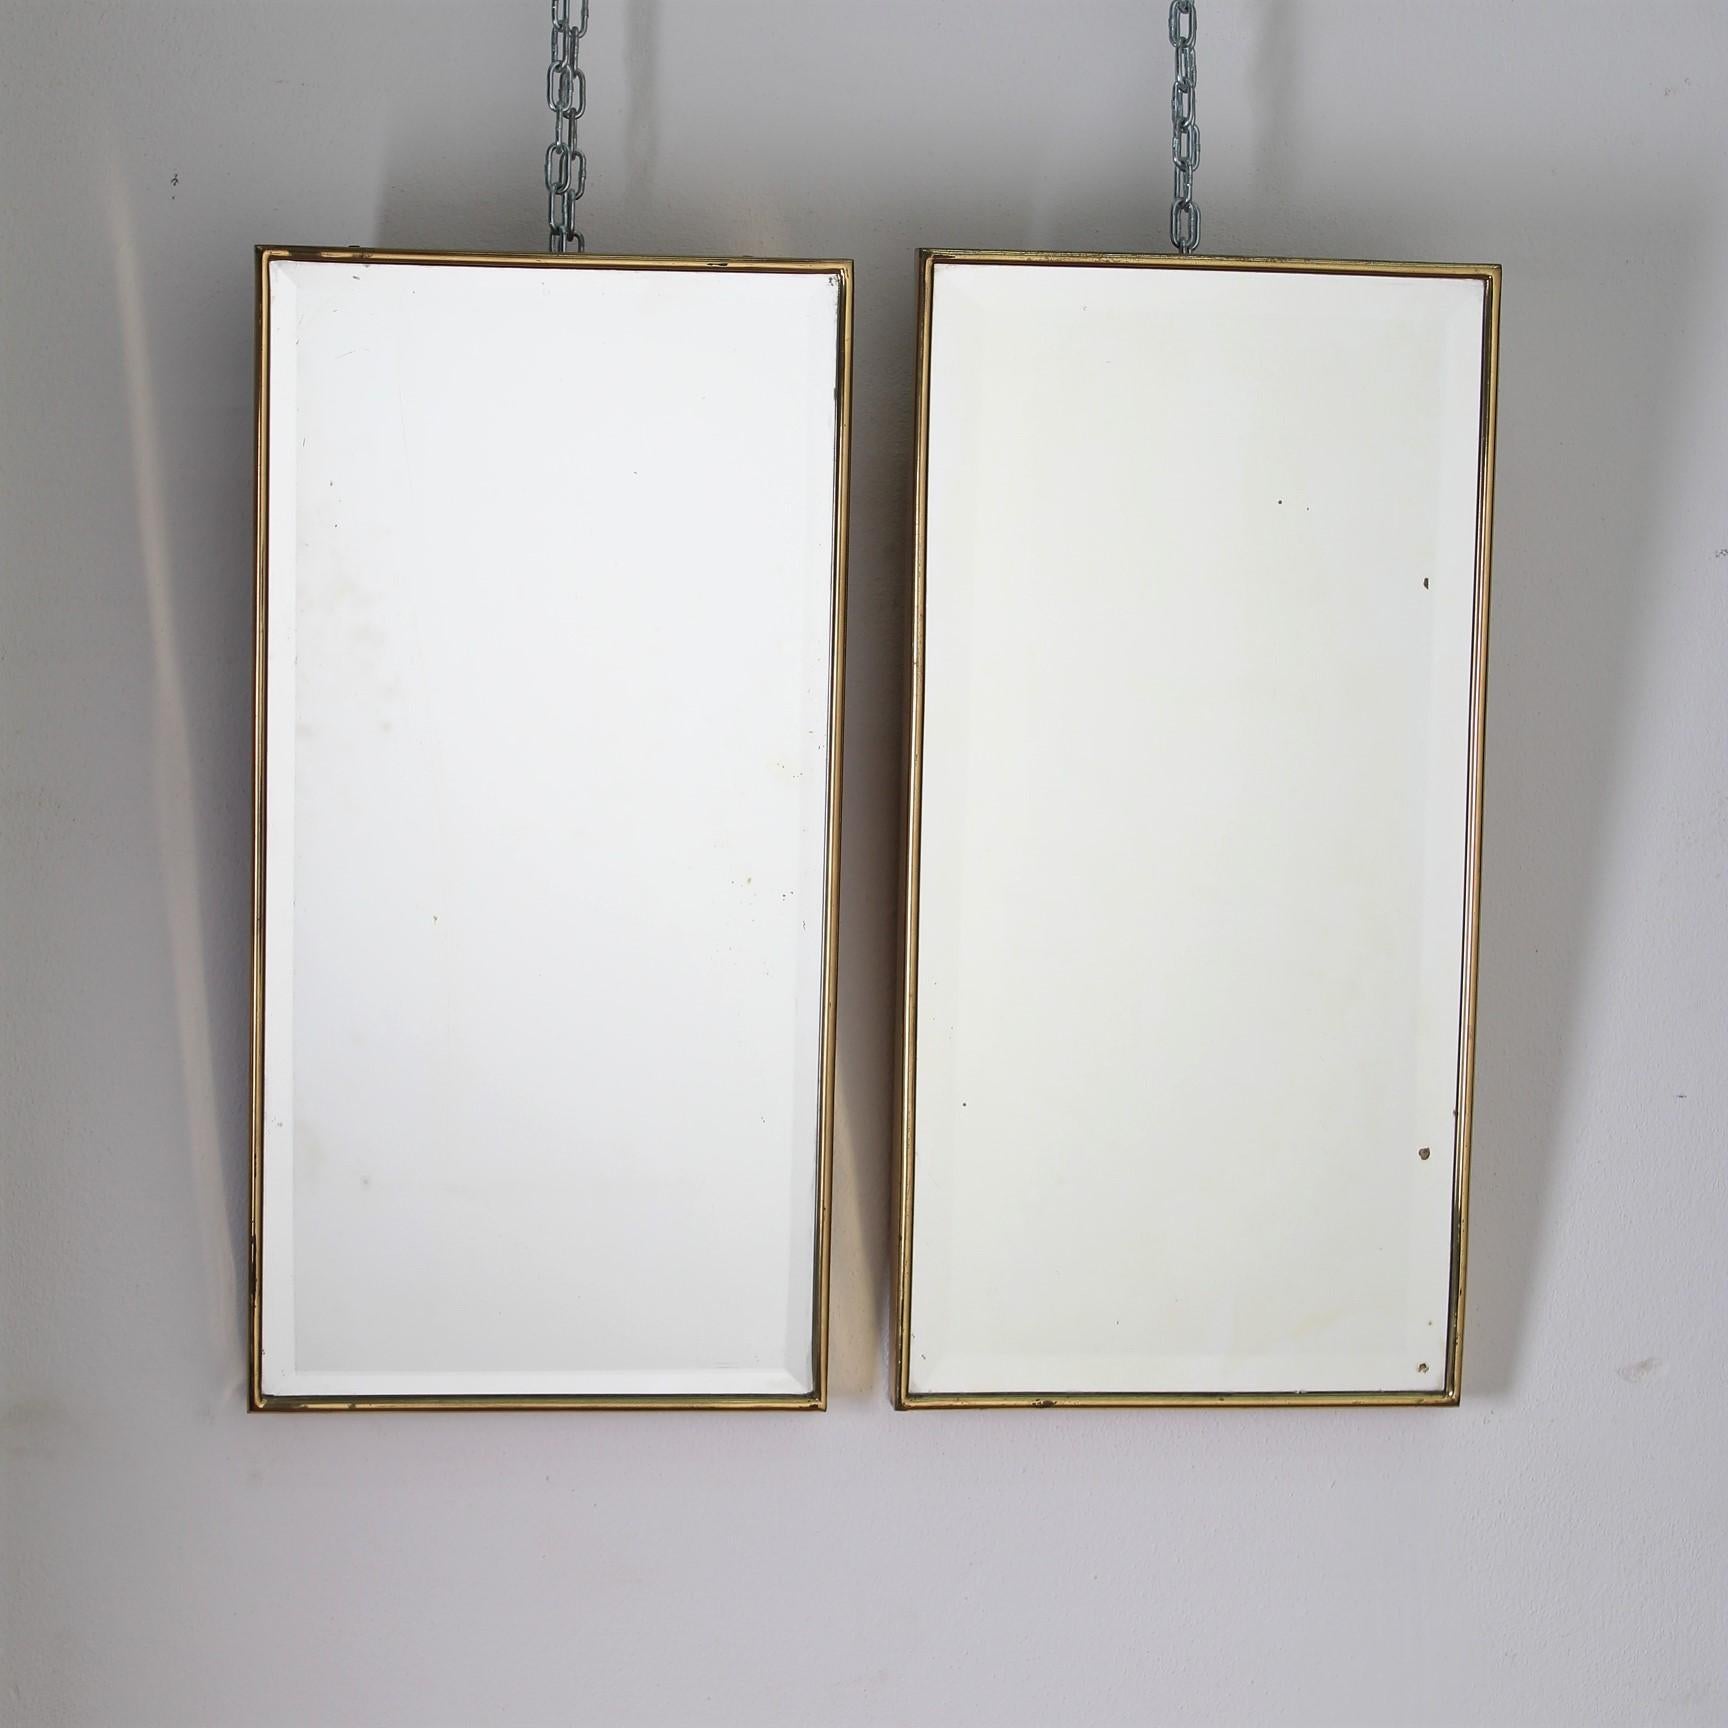 A large pair midcentury Italian wall mirrors with a brass frame from the circa 1950s. The mirrors have a rectangular form, bevelled at the edges, classically elegant, and distinct in a modern Gio Ponti style.
Wear consistent with age and use